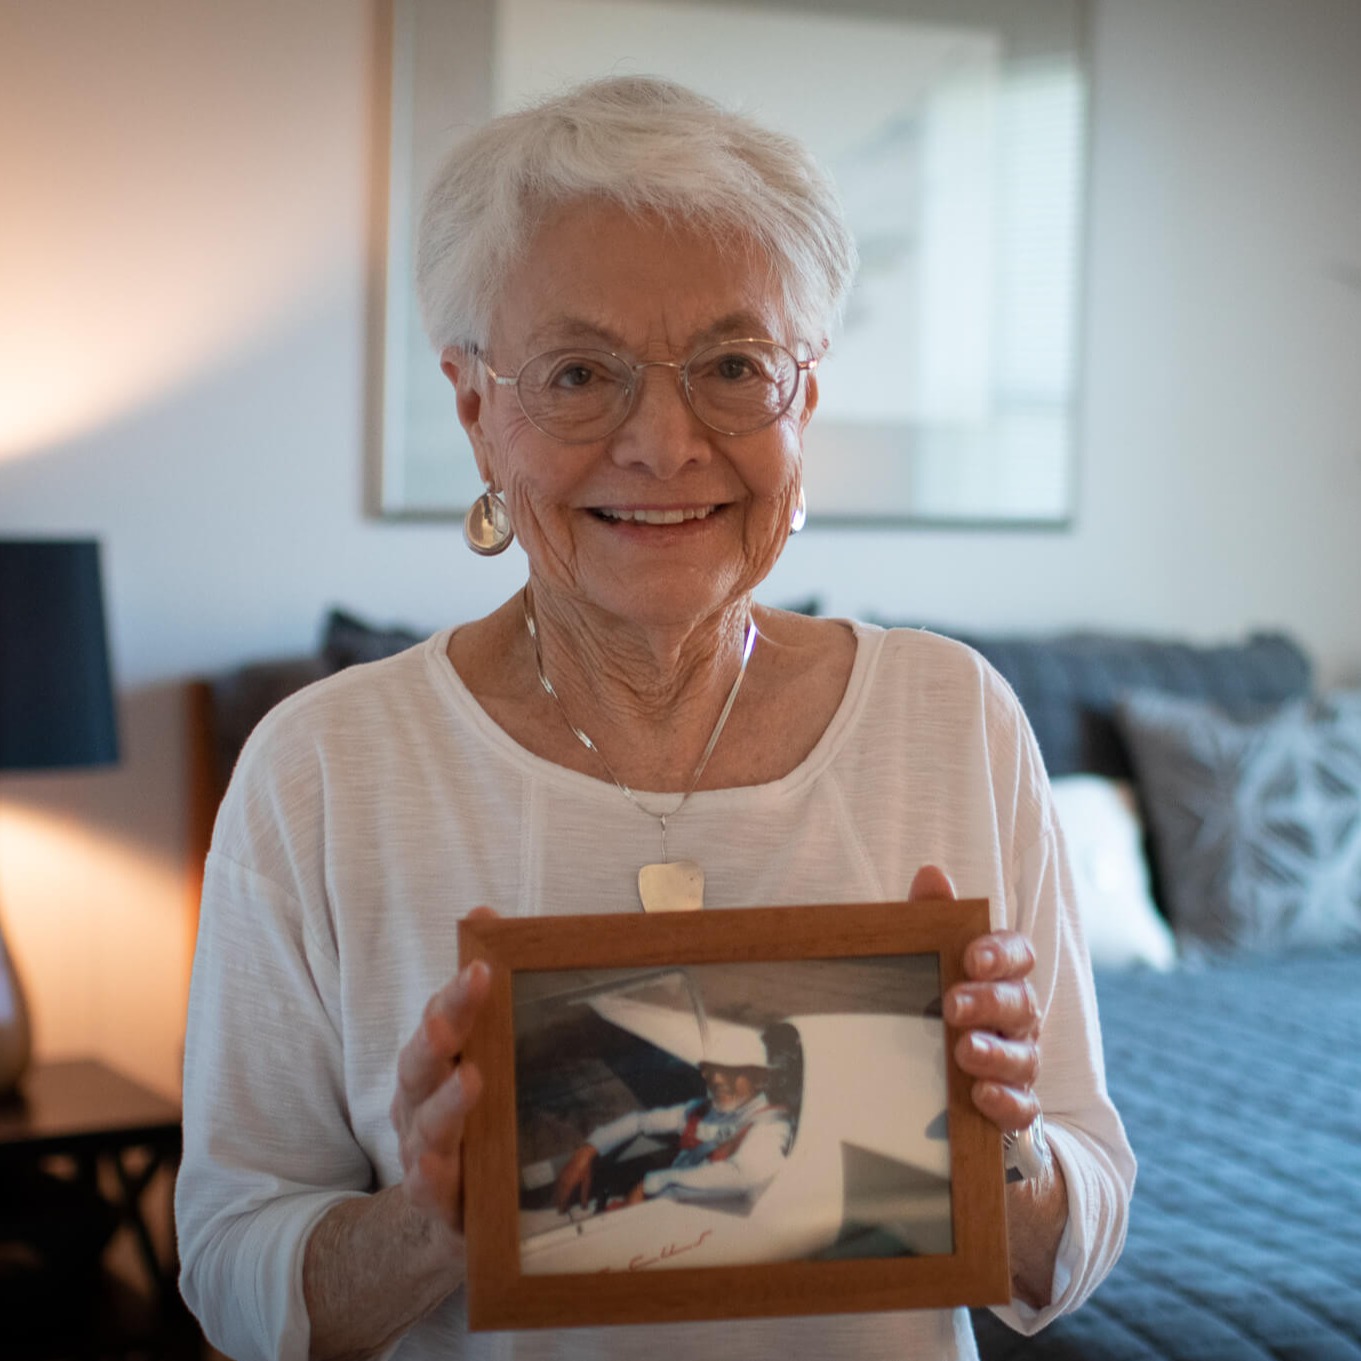 Shirley holding picture frame